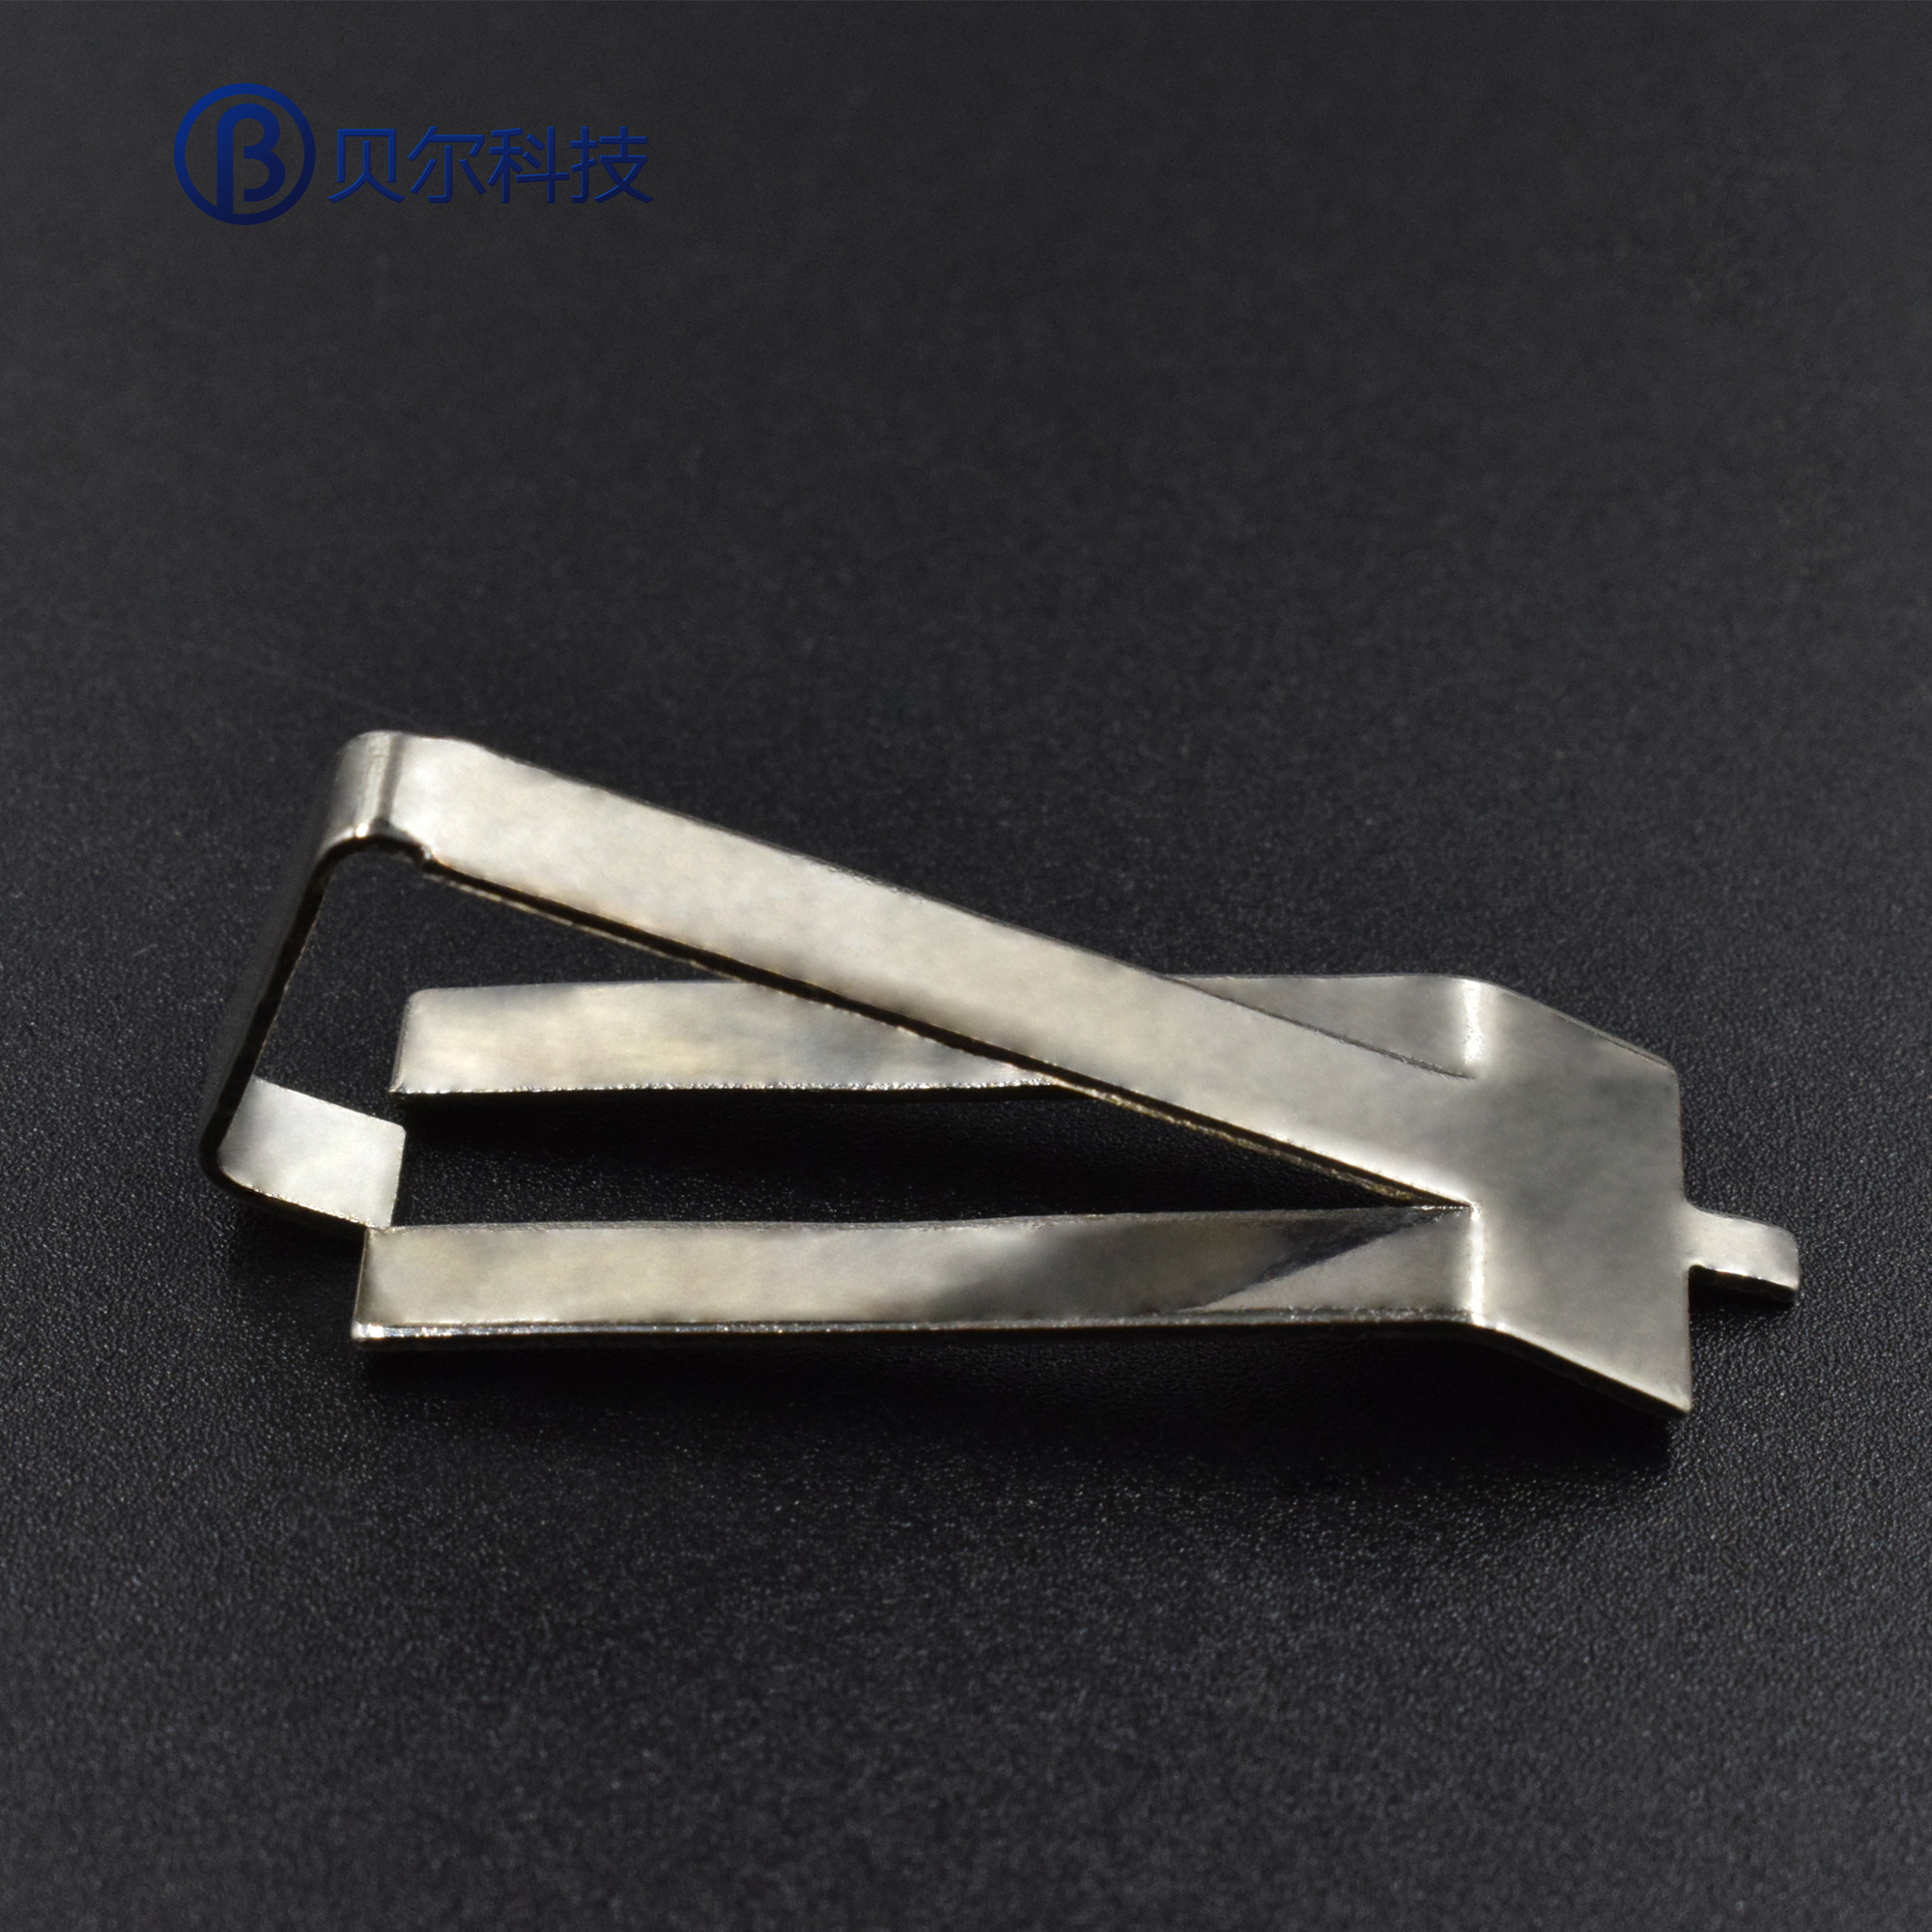 1Pcs-Hotbed-Bed-Printing-Platform-Lattice-Glass-Stainless-Steel-Fixing-Clip-for-3D-Printer-Heated-Be-1864371-5